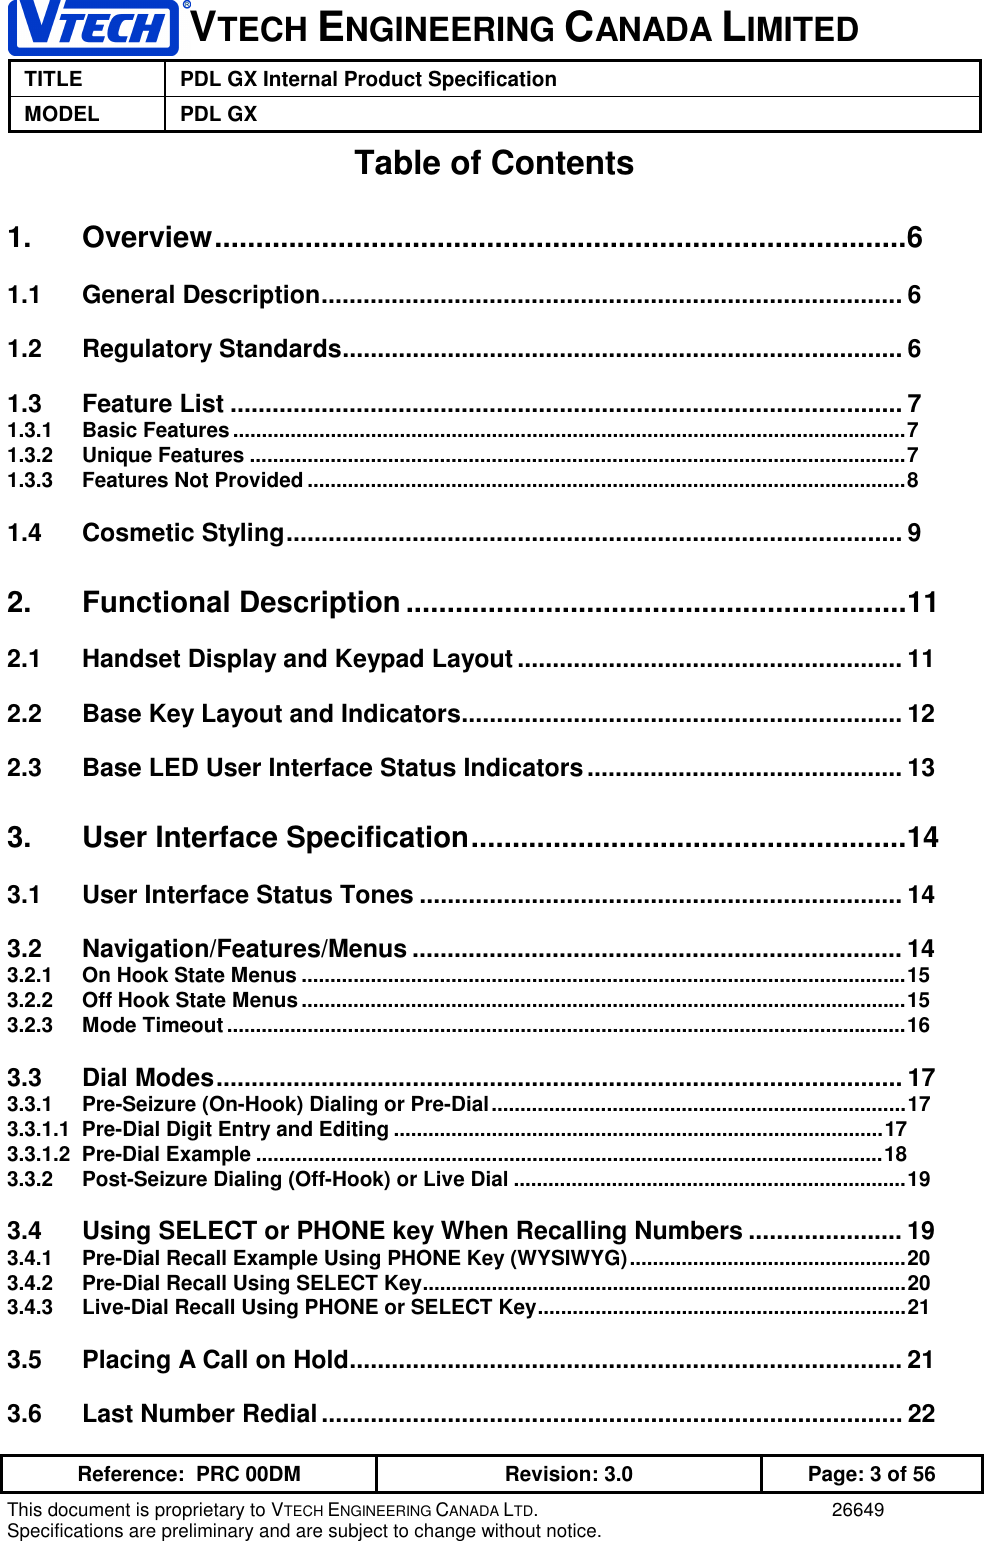 VTECH ENGINEERING CANADA LIMITEDTITLE PDL GX Internal Product SpecificationMODEL PDL GXReference:  PRC 00DM Revision: 3.0 Page: 3 of 56This document is proprietary to VTECH ENGINEERING CANADA LTD. 26649Specifications are preliminary and are subject to change without notice.Table of Contents1. Overview....................................................................................61.1 General Description................................................................................... 61.2 Regulatory Standards................................................................................ 61.3 Feature List ................................................................................................ 71.3.1 Basic Features.....................................................................................................................71.3.2 Unique Features ..................................................................................................................71.3.3 Features Not Provided ........................................................................................................81.4 Cosmetic Styling........................................................................................ 92. Functional Description .............................................................112.1 Handset Display and Keypad Layout ....................................................... 112.2 Base Key Layout and Indicators............................................................... 122.3 Base LED User Interface Status Indicators............................................. 133. User Interface Specification.....................................................143.1 User Interface Status Tones ..................................................................... 143.2 Navigation/Features/Menus ...................................................................... 143.2.1 On Hook State Menus .........................................................................................................153.2.2 Off Hook State Menus.........................................................................................................153.2.3 Mode Timeout......................................................................................................................163.3 Dial Modes.................................................................................................. 173.3.1 Pre-Seizure (On-Hook) Dialing or Pre-Dial........................................................................173.3.1.1  Pre-Dial Digit Entry and Editing .....................................................................................173.3.1.2  Pre-Dial Example .............................................................................................................183.3.2 Post-Seizure Dialing (Off-Hook) or Live Dial ....................................................................193.4 Using SELECT or PHONE key When Recalling Numbers ...................... 193.4.1 Pre-Dial Recall Example Using PHONE Key (WYSIWYG)................................................203.4.2 Pre-Dial Recall Using SELECT Key....................................................................................203.4.3 Live-Dial Recall Using PHONE or SELECT Key................................................................213.5 Placing A Call on Hold............................................................................... 213.6 Last Number Redial................................................................................... 22